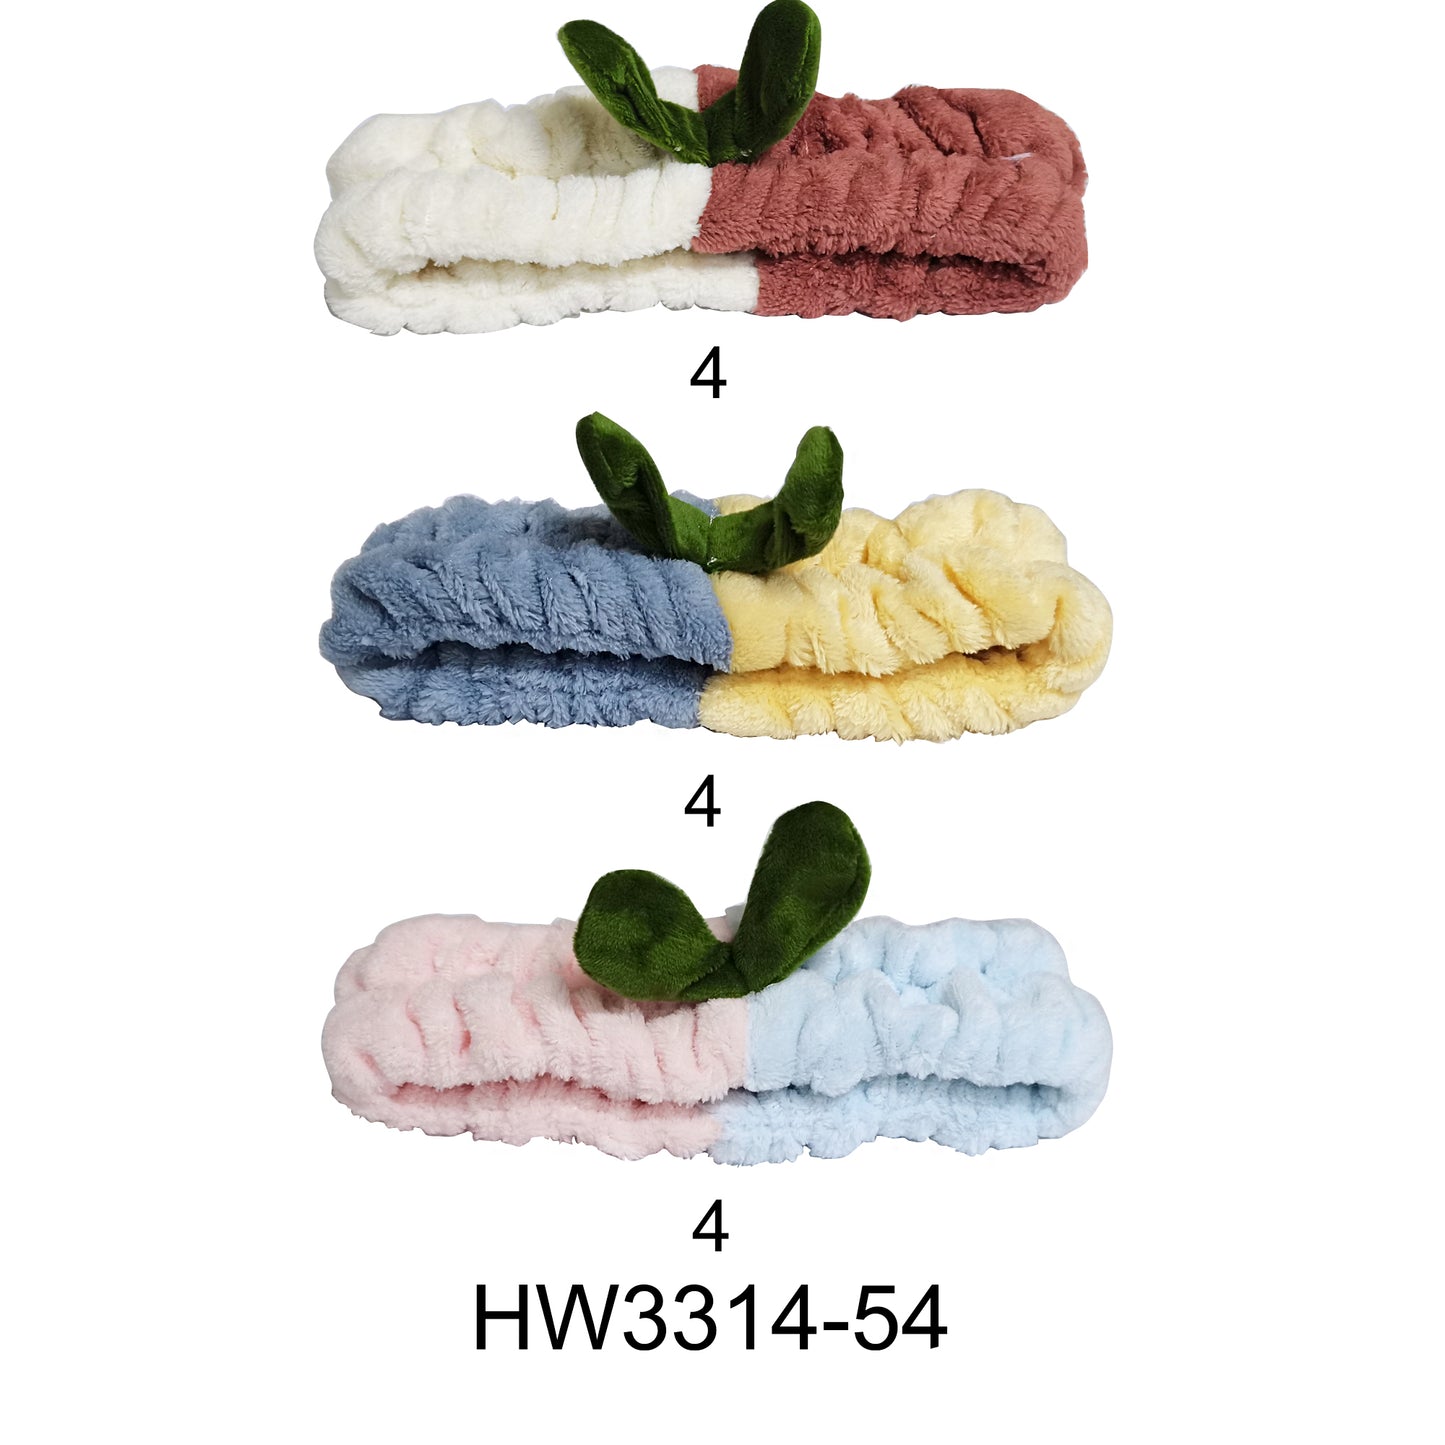 SPROUT TWO TONE SPA HEADWRAP 3314-54 (12PC)